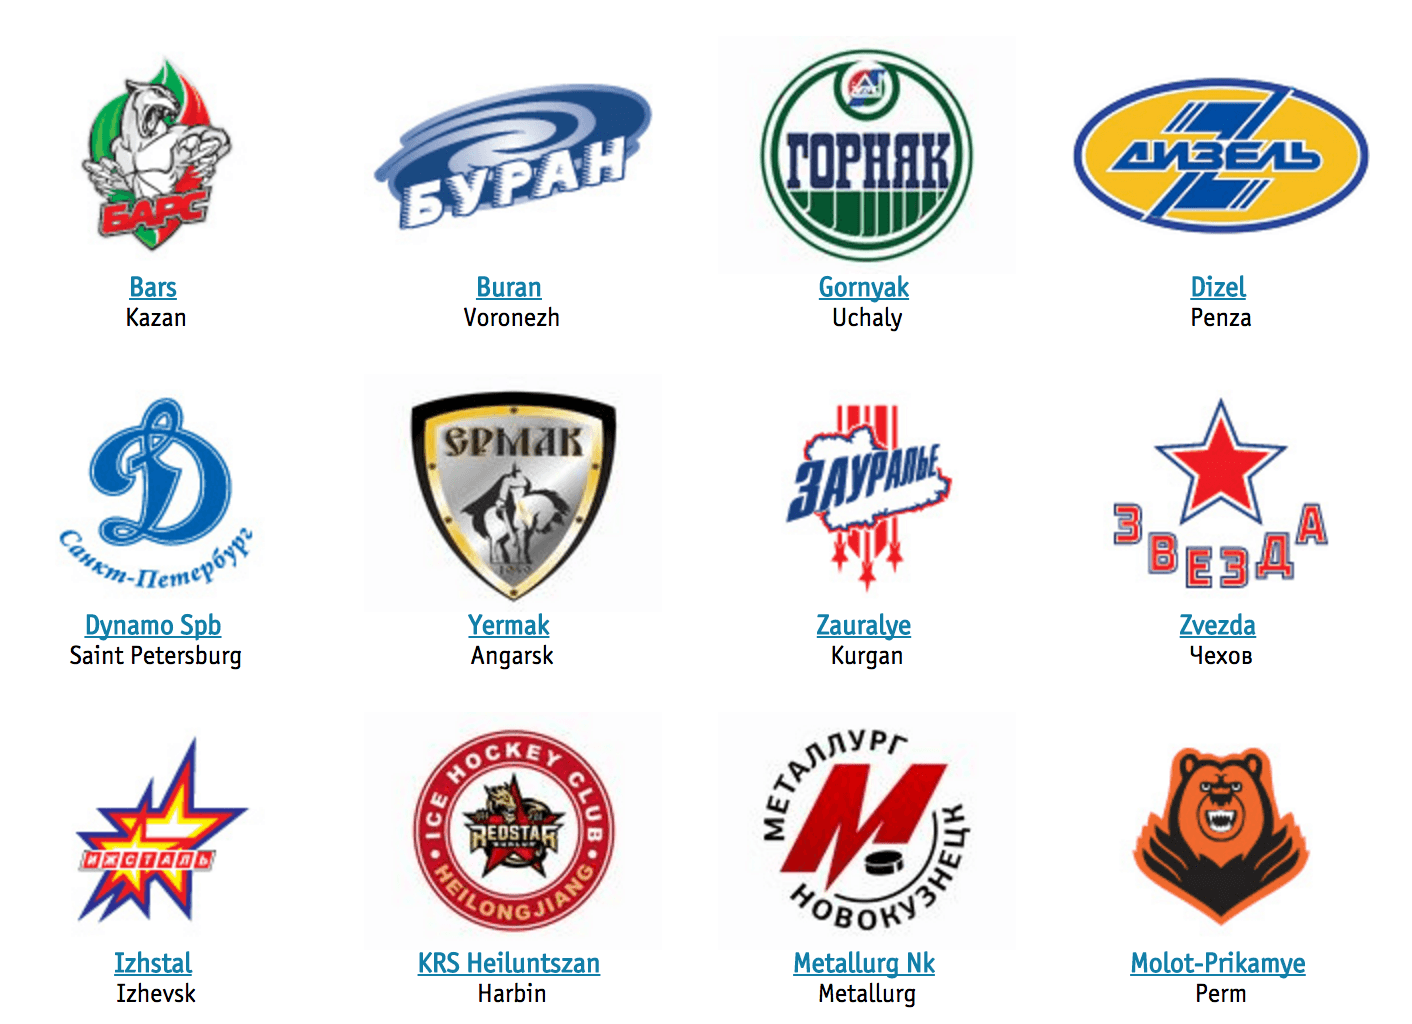 SHL Logo - Two SHL teams in Russia have logos extremely similar to these two ...